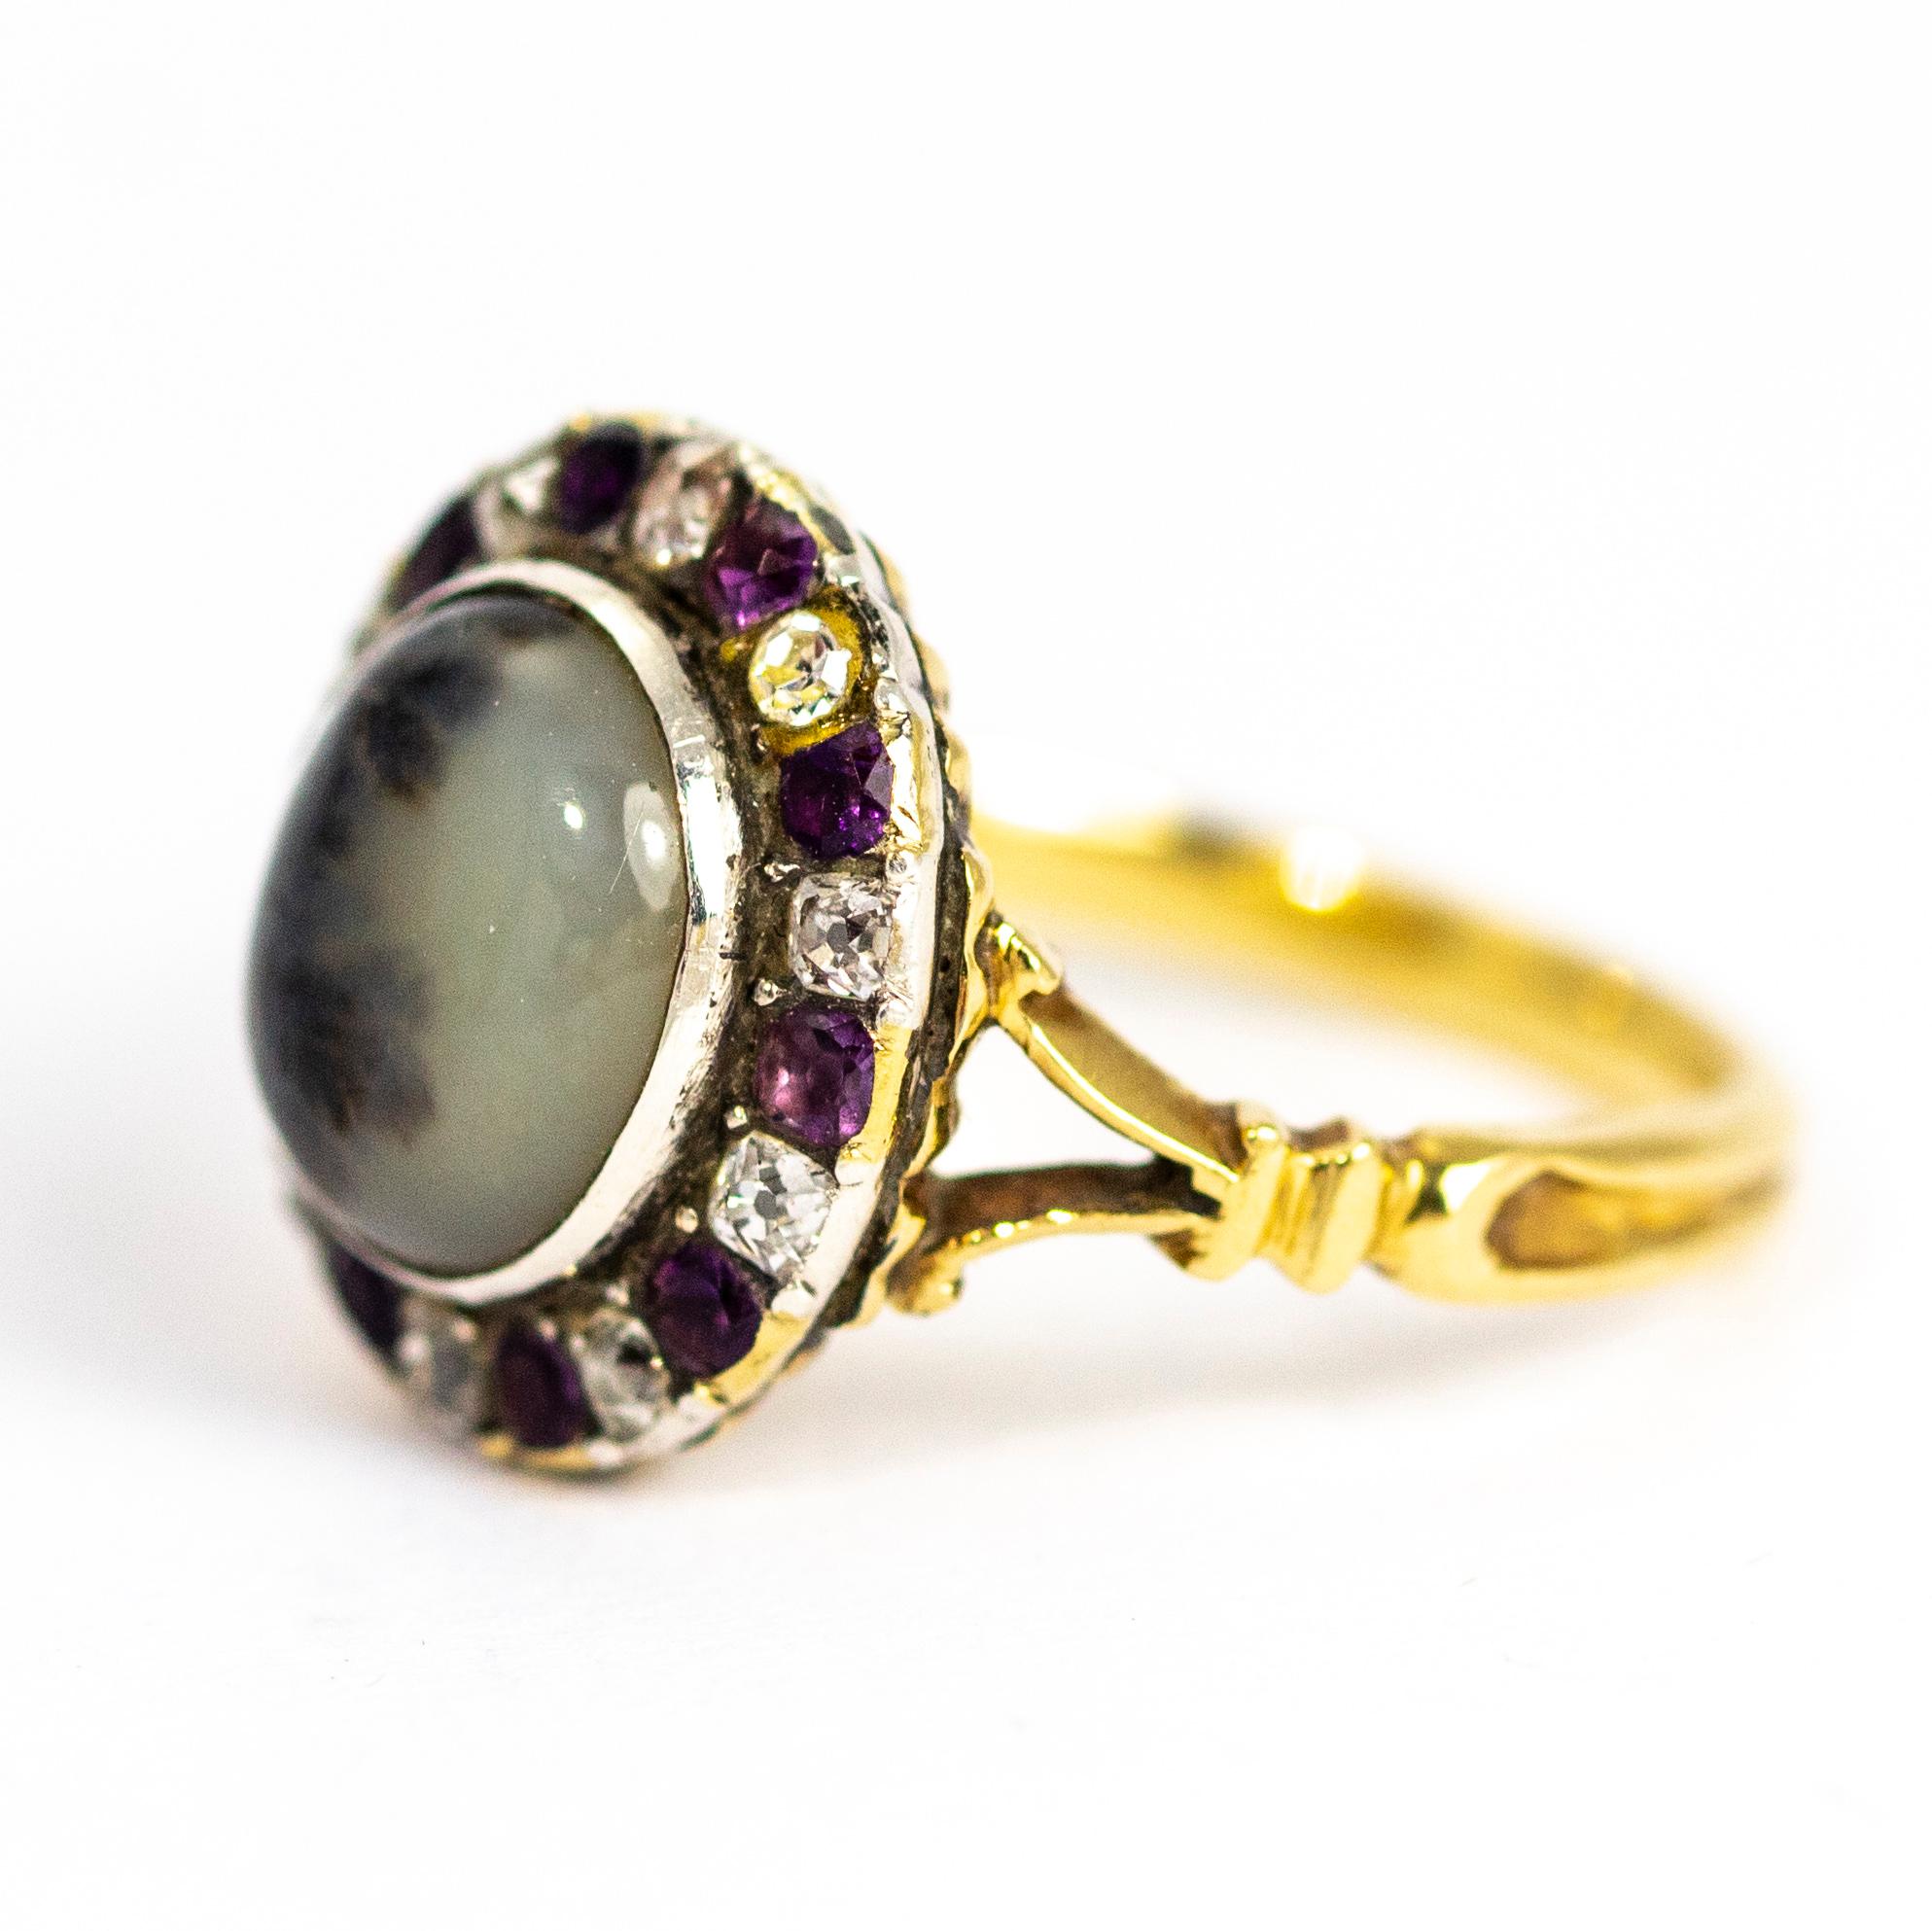 This exquisite late Georgian ring is set with a superb dendritic agate cabochon. The agates wonderful colouring resembles a group of trees silhouetted agains a twilight sky. Surrounding the central stone is a halo of alternating old mine cut